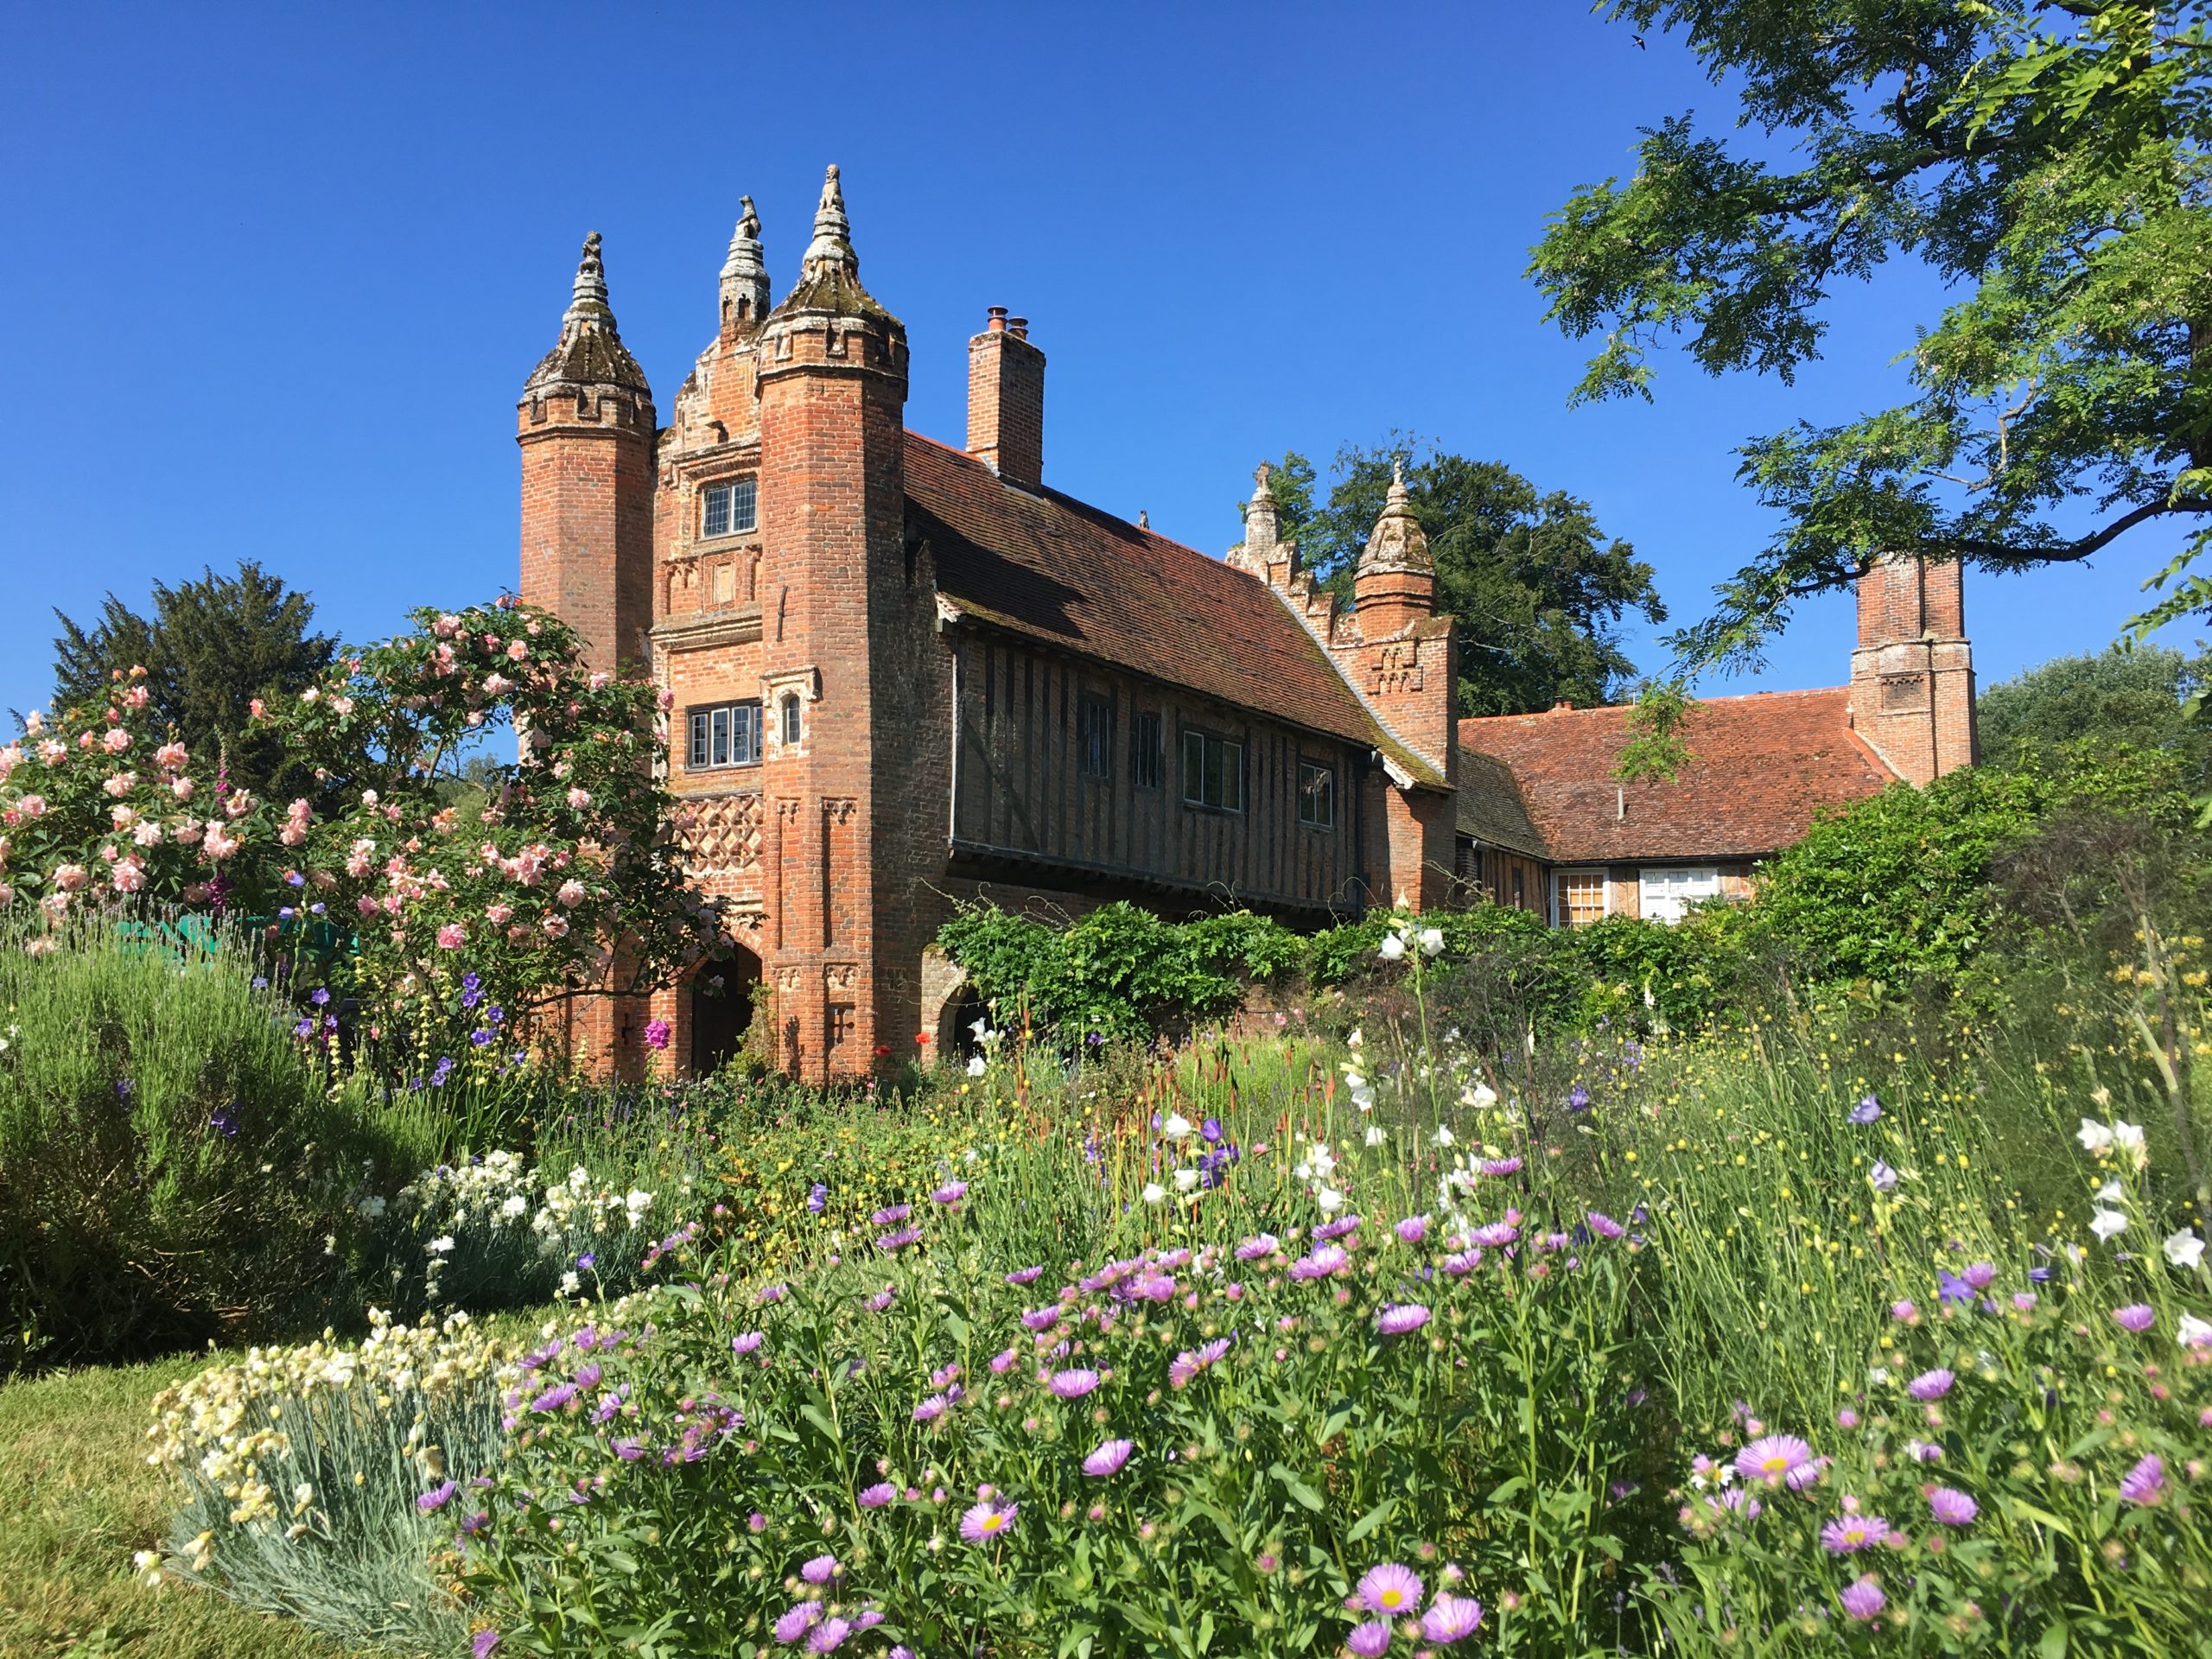 West Stow Hall is a beautiful, early, Tudor manor house in Suffolk, England. Associated with Mary Tudor, Queen of France, it is now a B&B and is a perfect place to stay if you are touring Suffolk and love staying in historic properties.